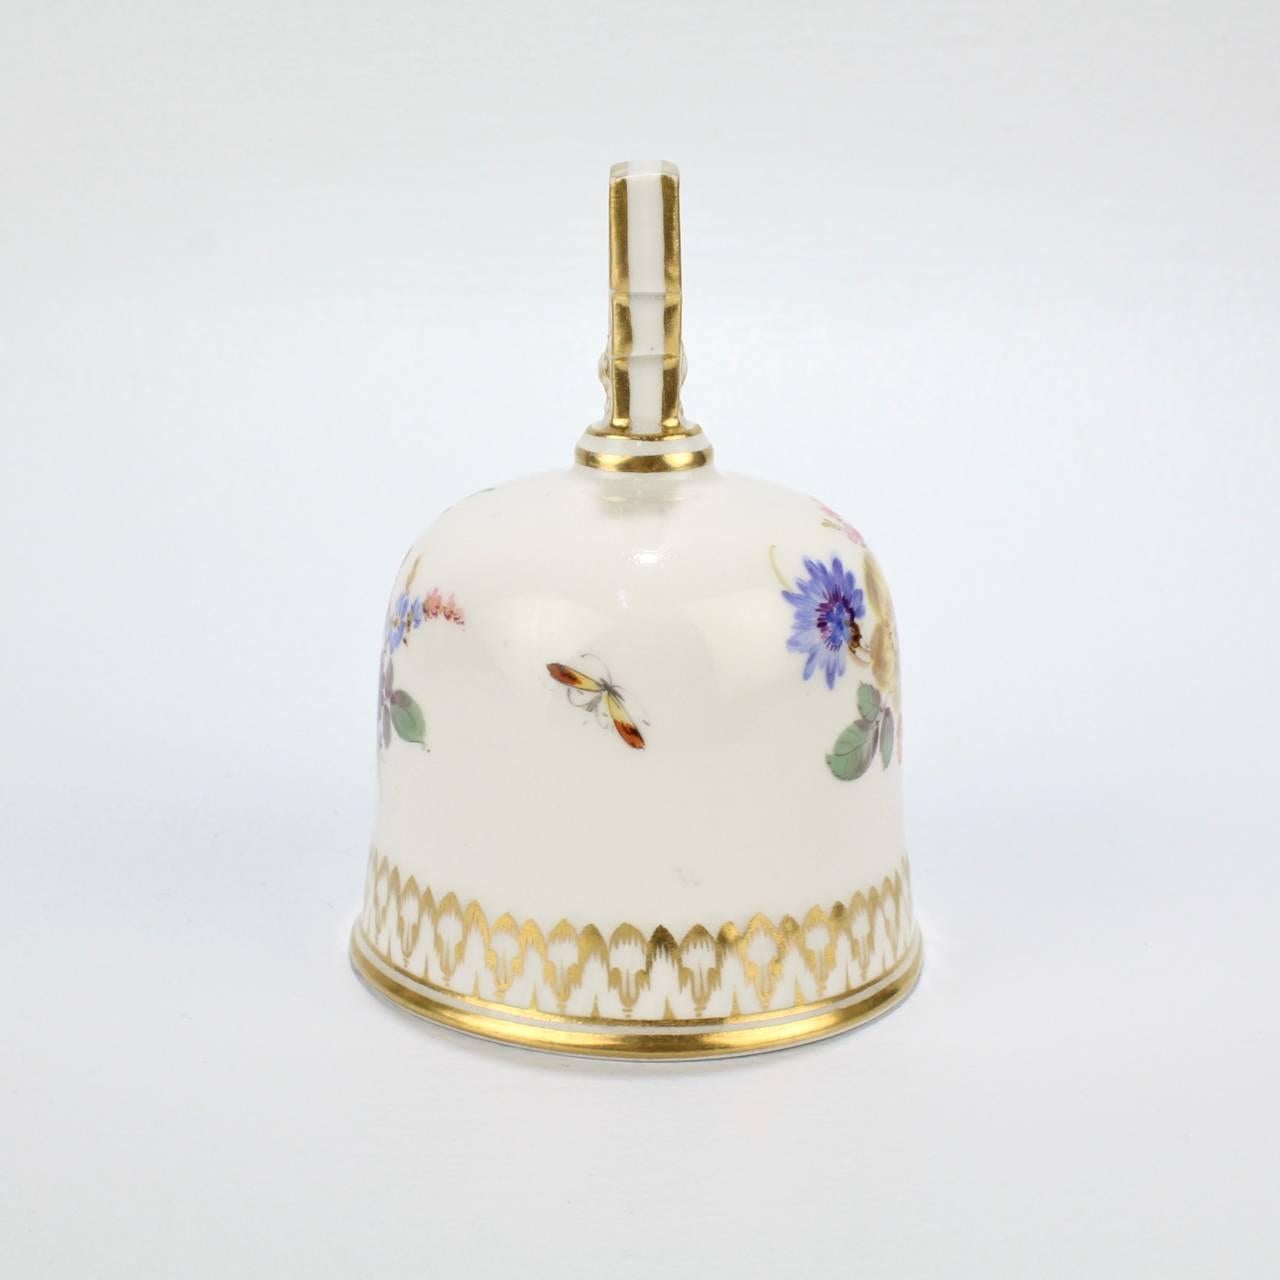 A fine antique Meissen porcelain table bell with Dresden flowers (or Deutsche Blumen) decoration.

Each side bears a different floral bouquet.

The interior has a factory original small wooden clapper and bears a blue underglaze crossed swords